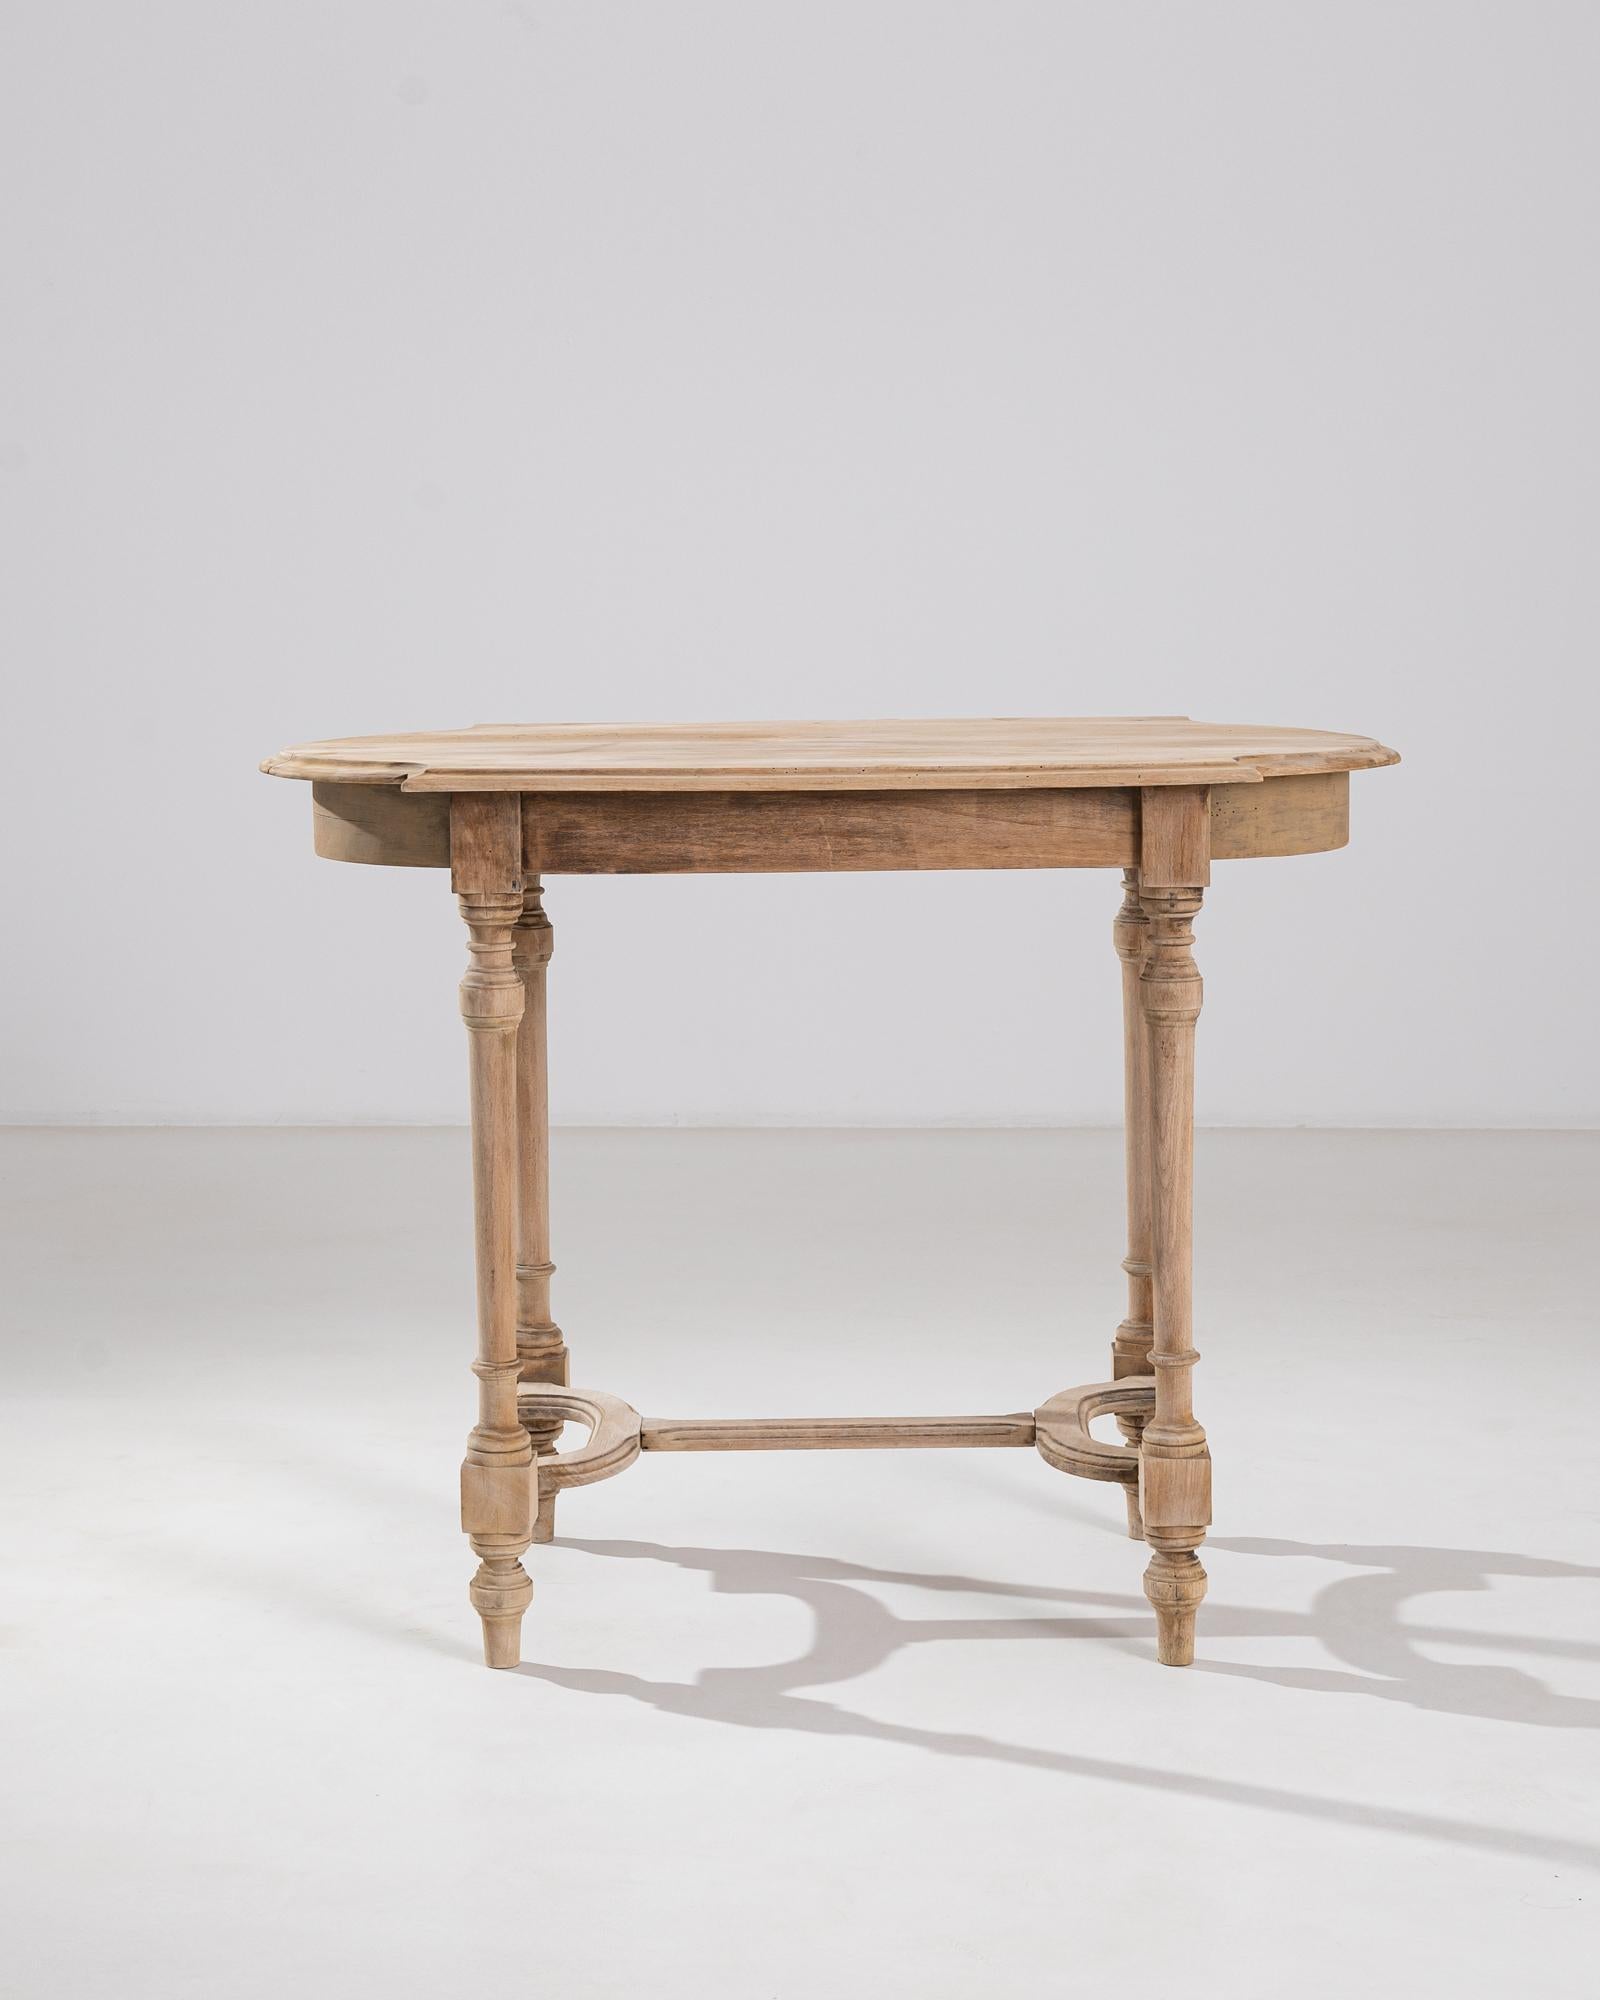 A French 19th century side table made from bleached beech wood. The table’s top is sculpted into a unique rectangle with round extensions, setting the playful and elegant tone of its silhouette. Below, criss-crossing stretchers connect via lathed